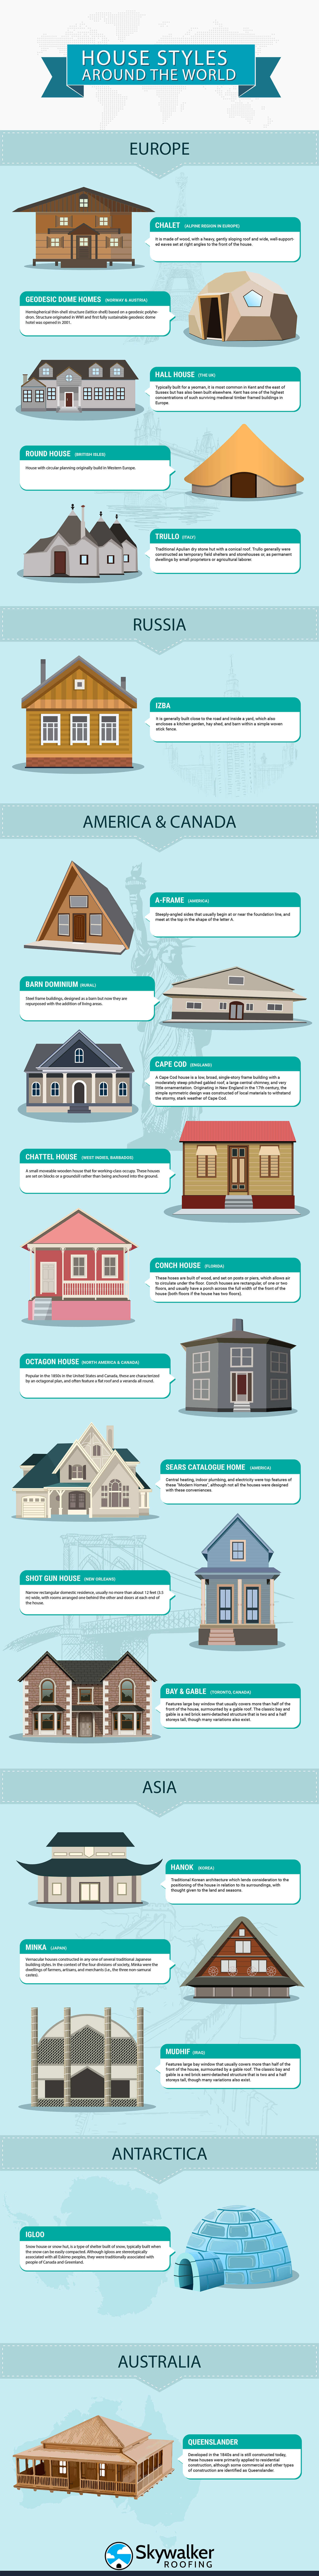 Diverse House Styles Around the World - Infographic